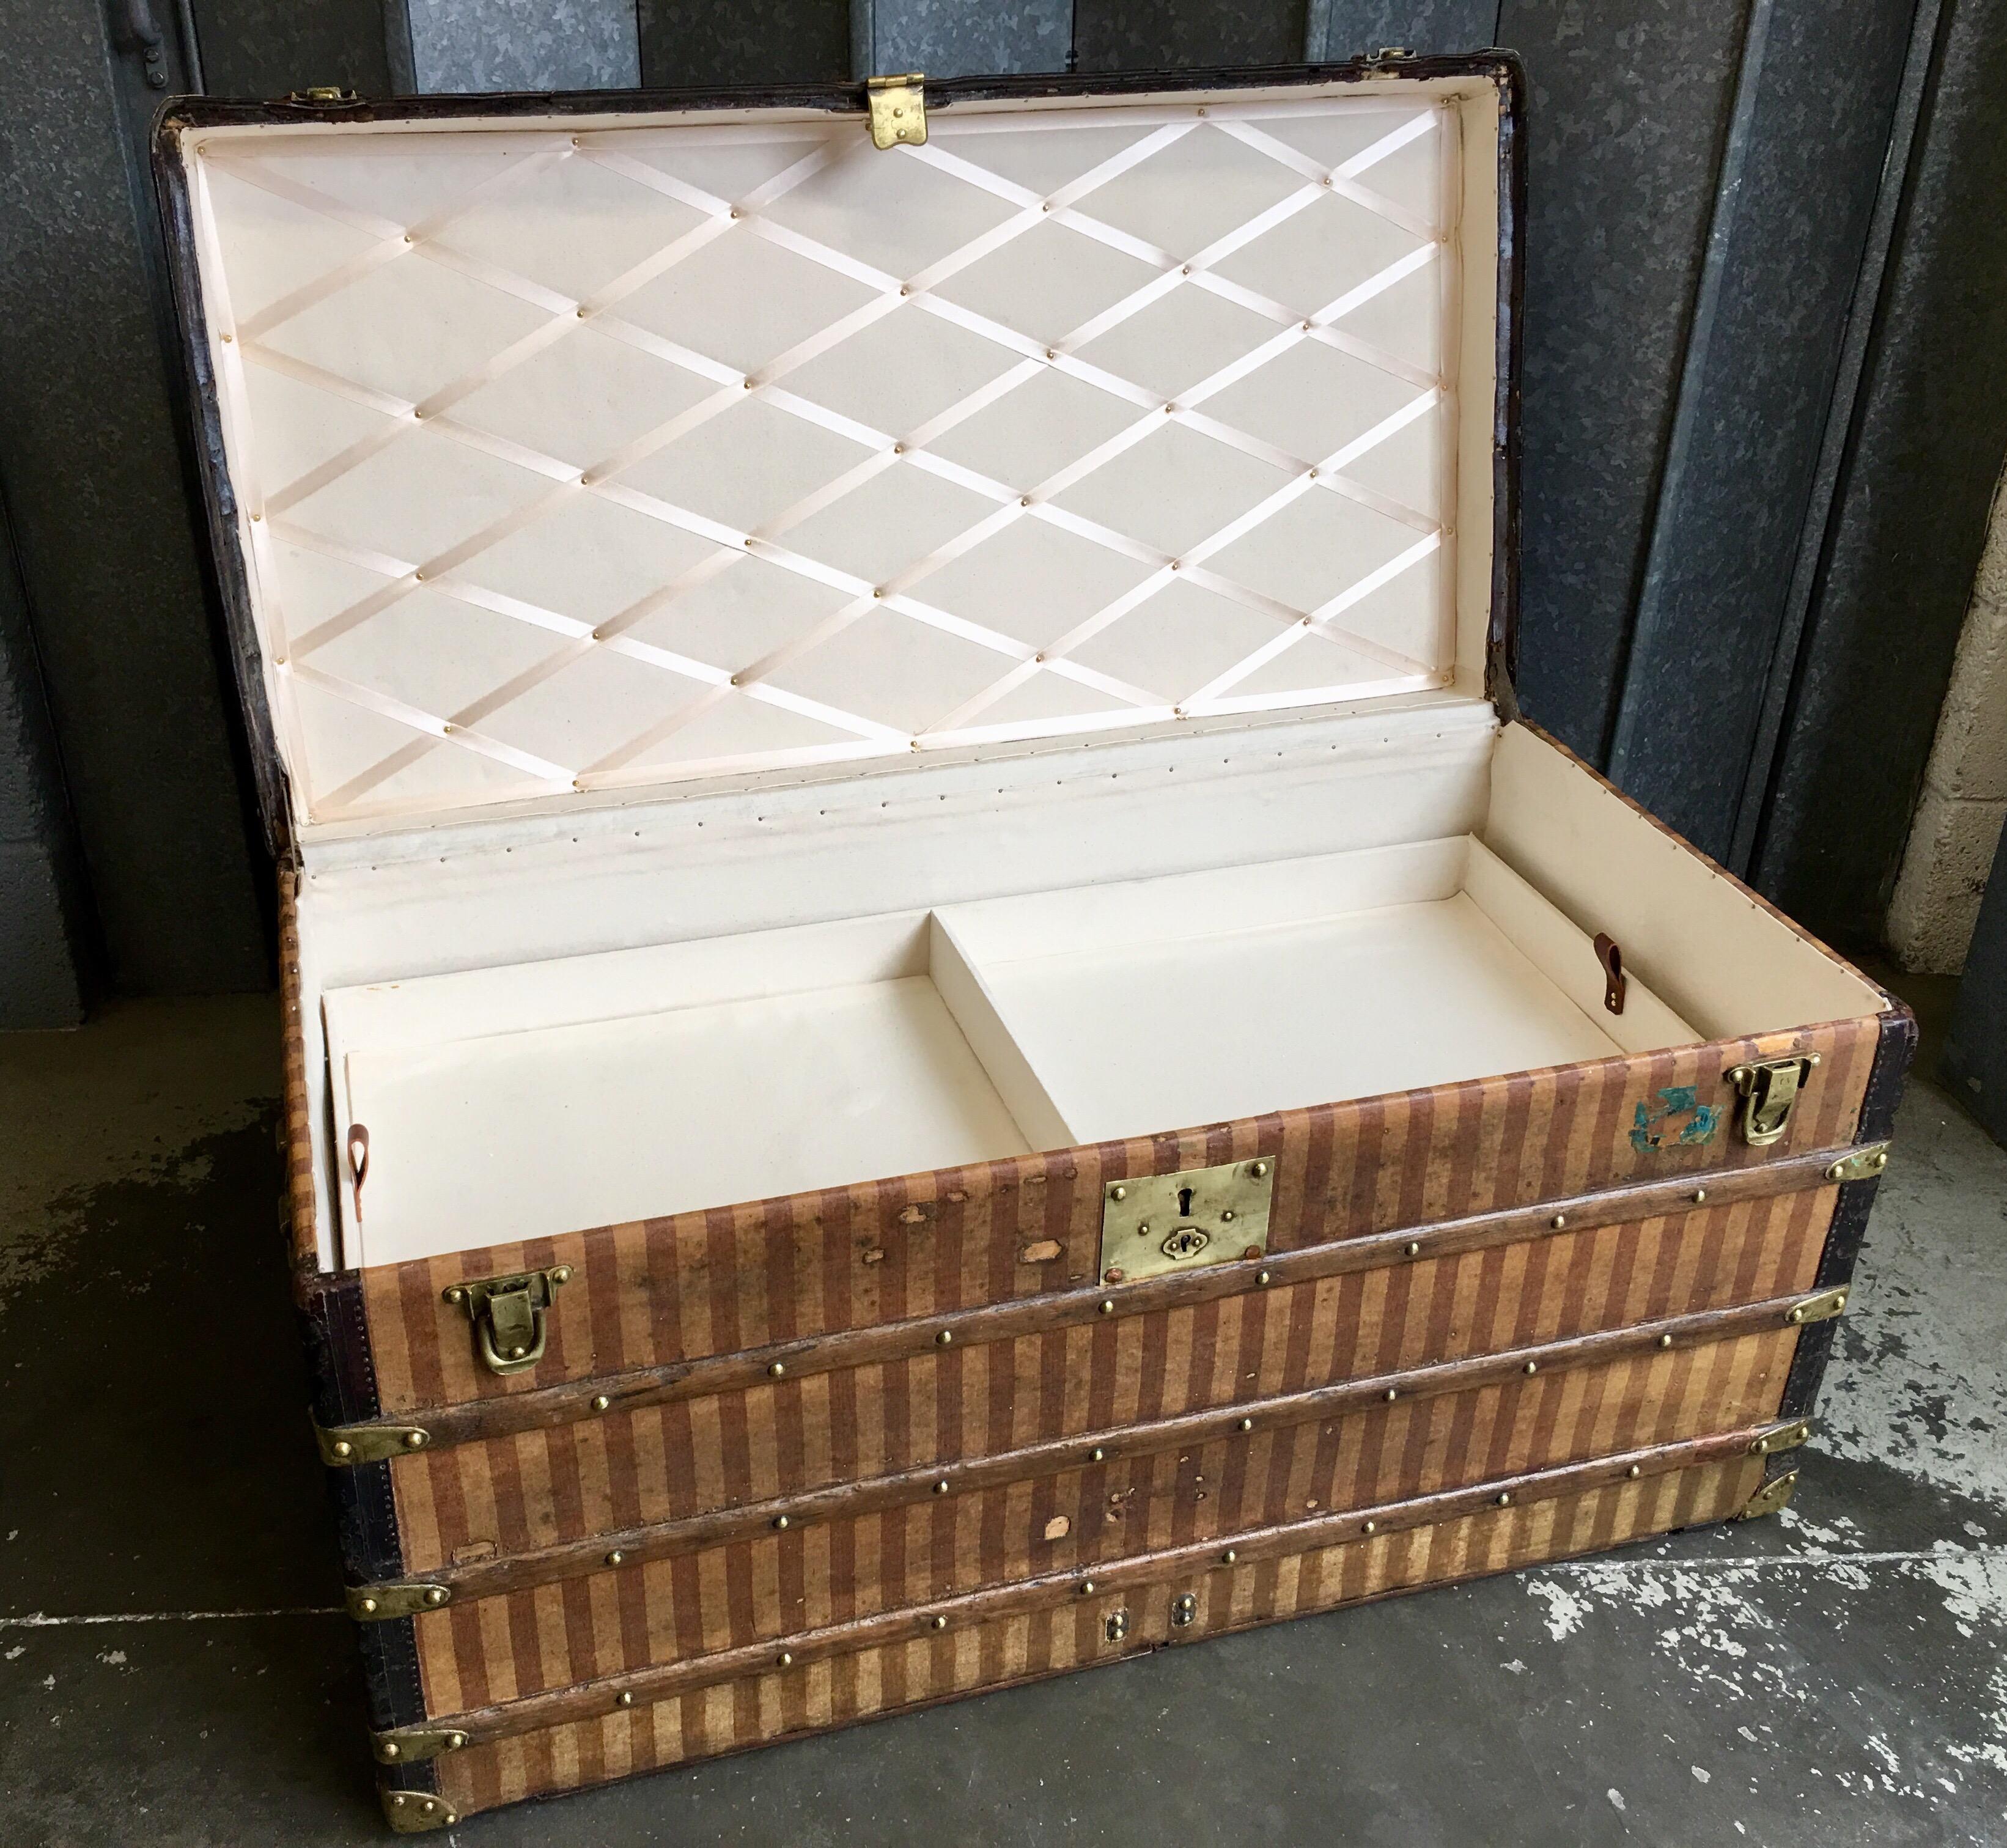 Louis Vuitton trunk in the rayee striped livery. When renovated, the date of manufacture was written in pencil underneath the old lining. The striped rayee fabric was replaced in 1888, so this was one of the last made in the stripe covering.